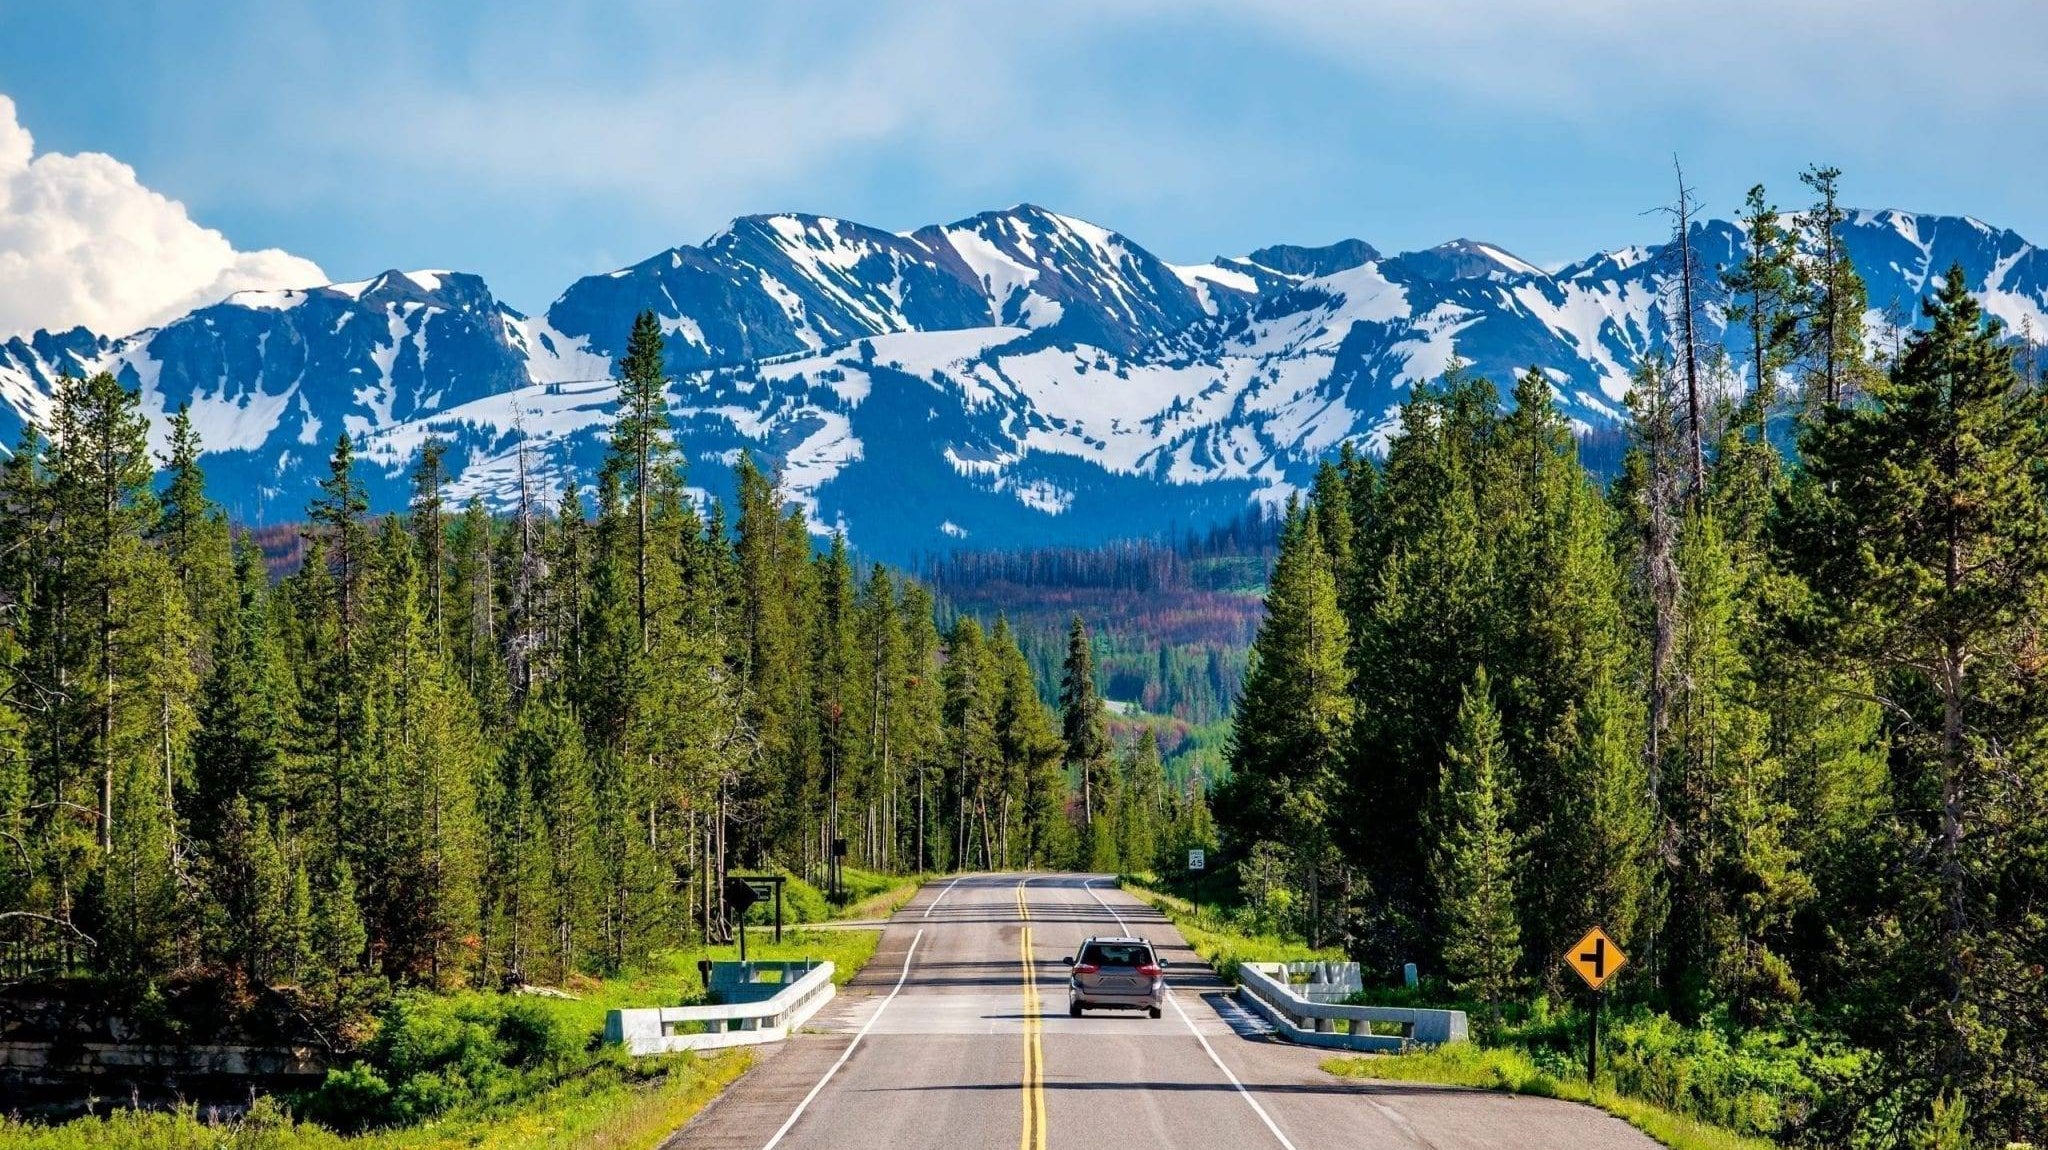 Top 7 Motorcycle Road Trips Across the USA.